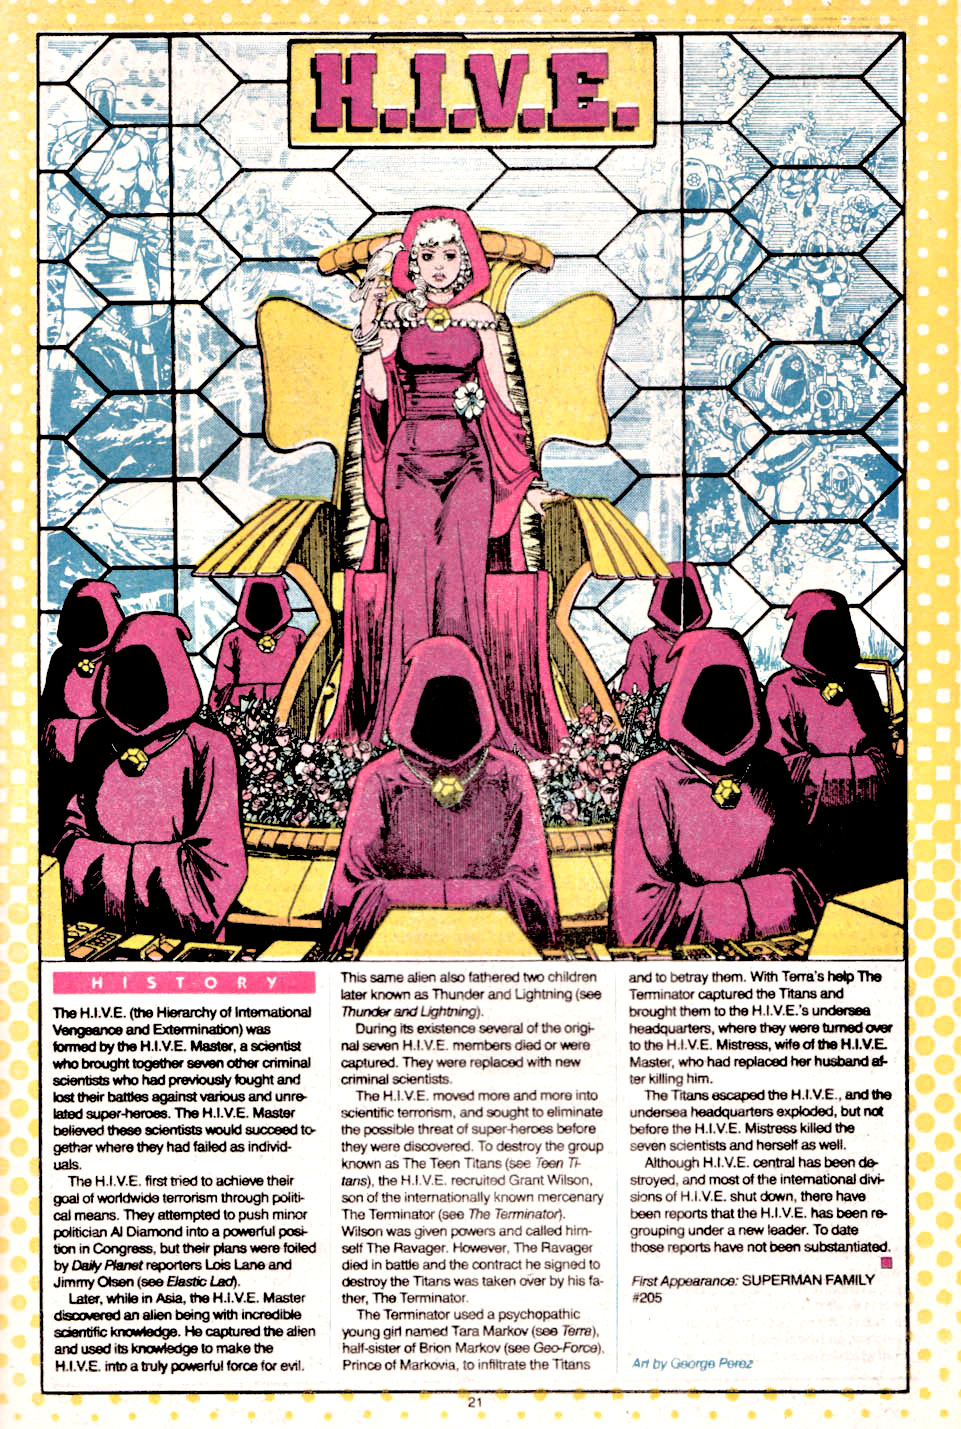 H.I.V.E. by George Perez - Who's Who: The Definitive Directory of the DC Universe #10